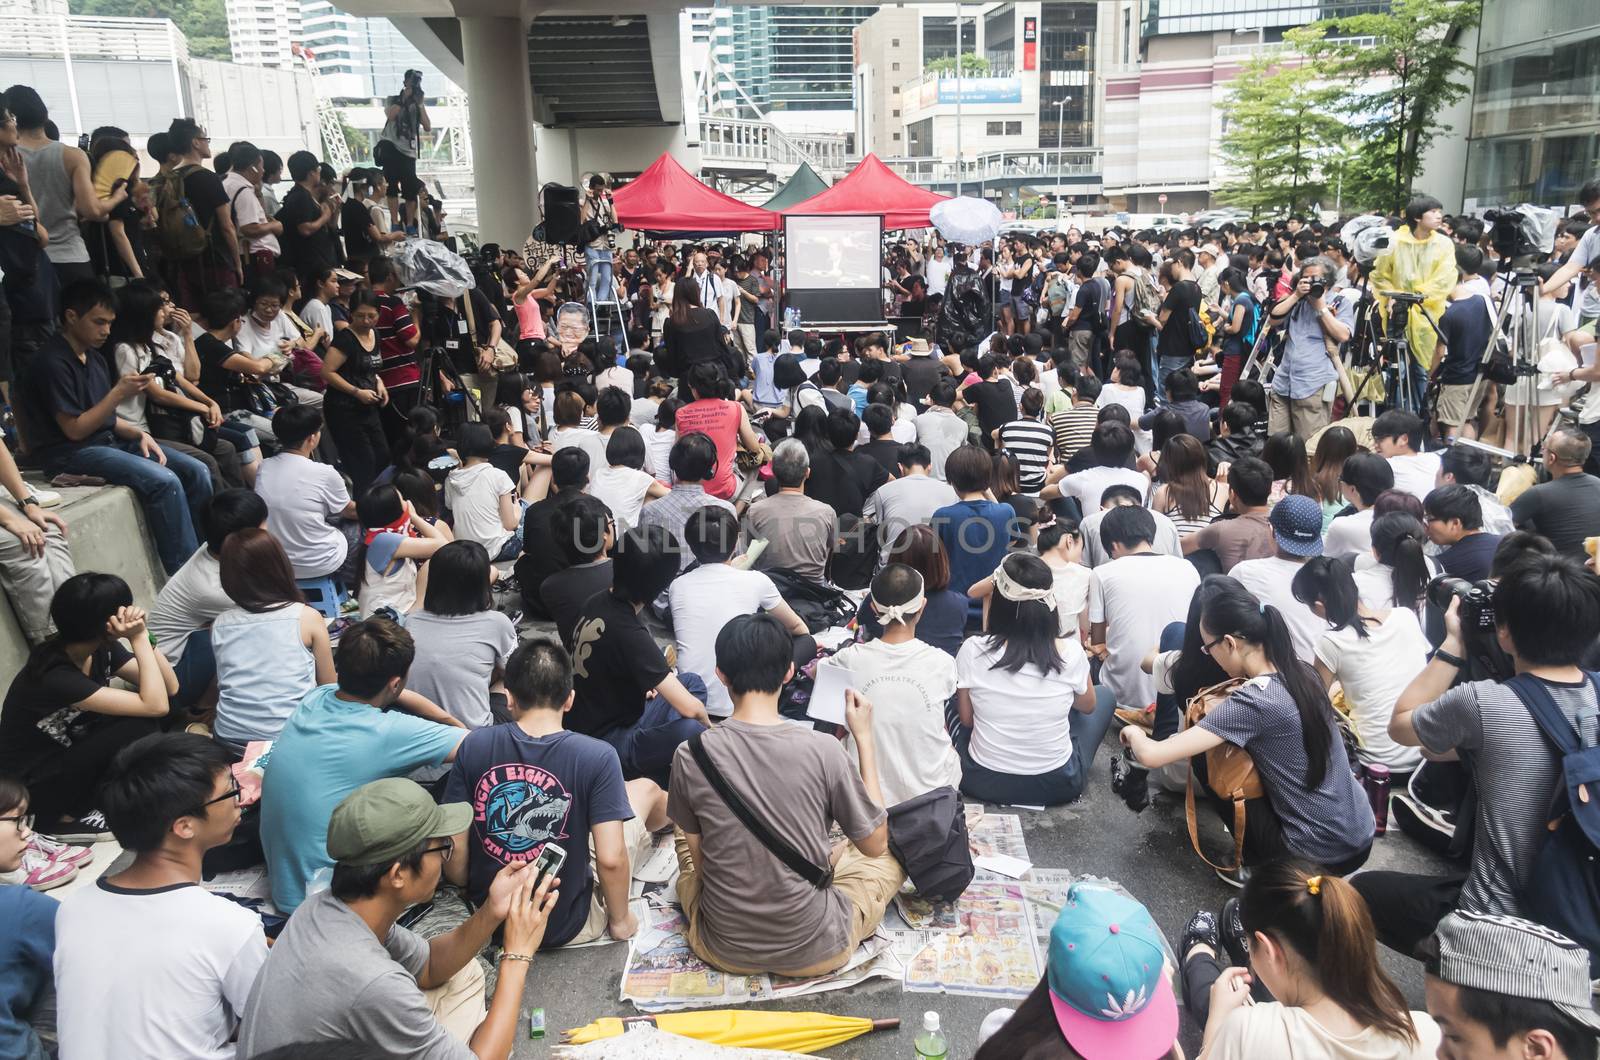 HONG KONG - JUNE 20: Protesters gathered outside the government headquarters on June 20, 2014 in Hong Kong. The Finance Committee meeting in the Legislative Council that is vetting an initial HK$340 million funding request to build two new towns in northeast New Territories in Hong Kong. 